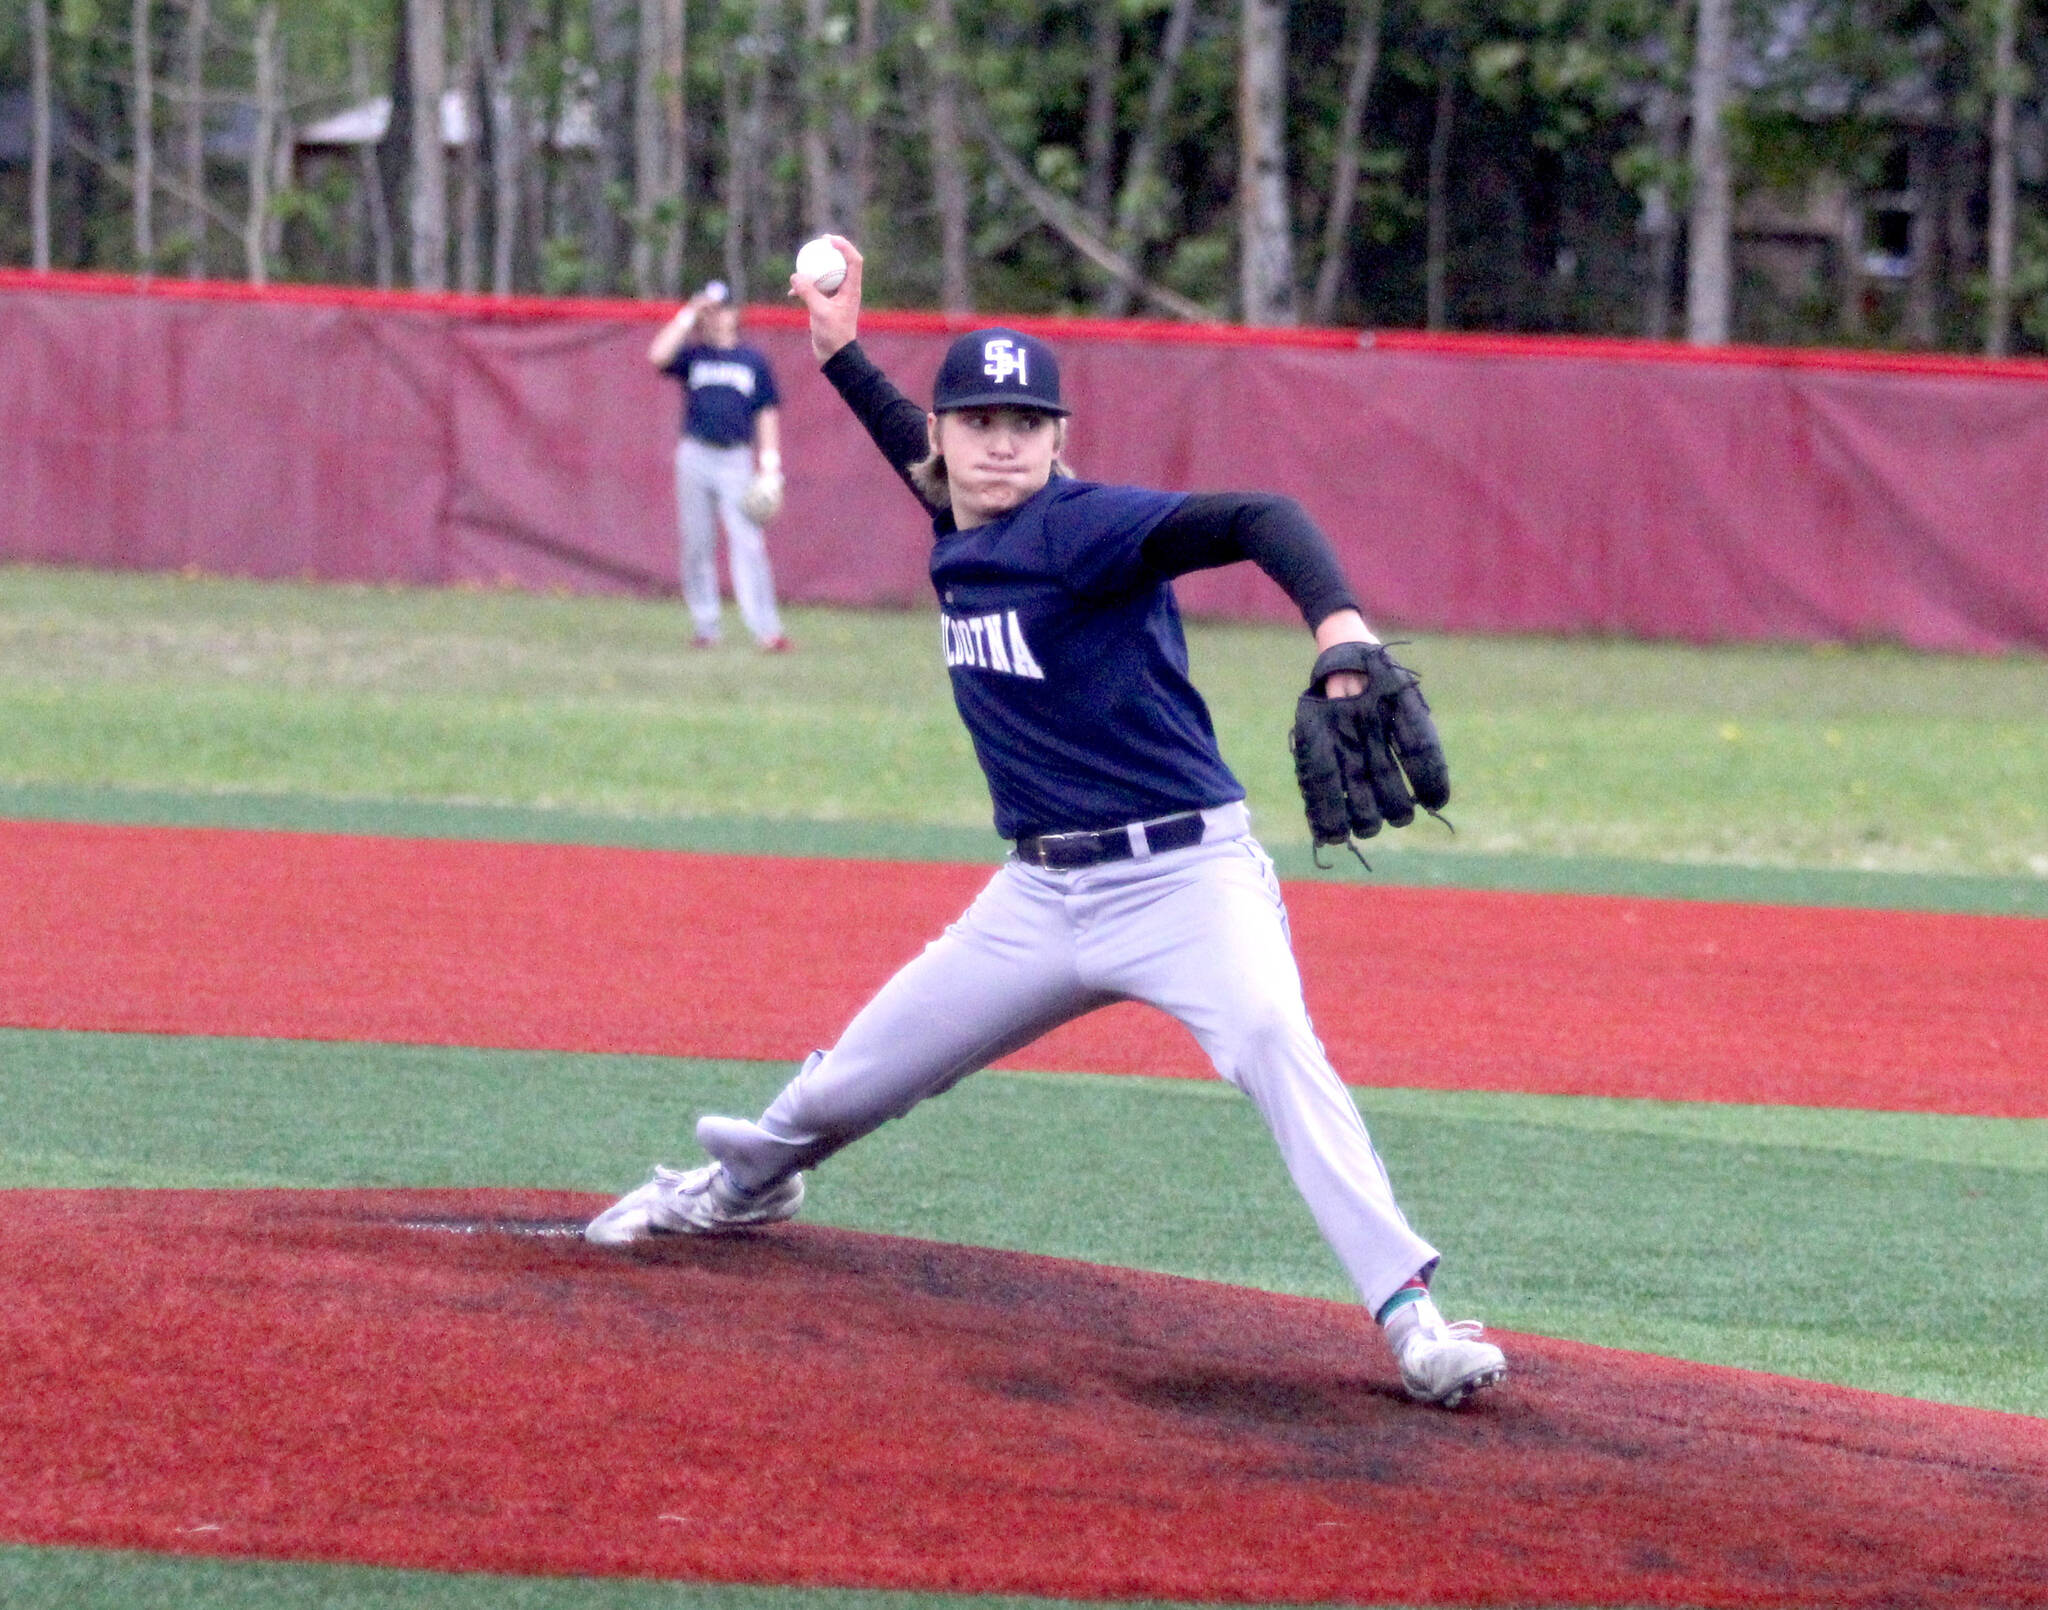 Soldotna’s Trenton Ohnemus fires a pitch against the Palmer Moose during the Division II state quarterfinal game Thursday, June 1, 2023, at Wasilla High School. (Jeremiah Bartz/Frontiersman)